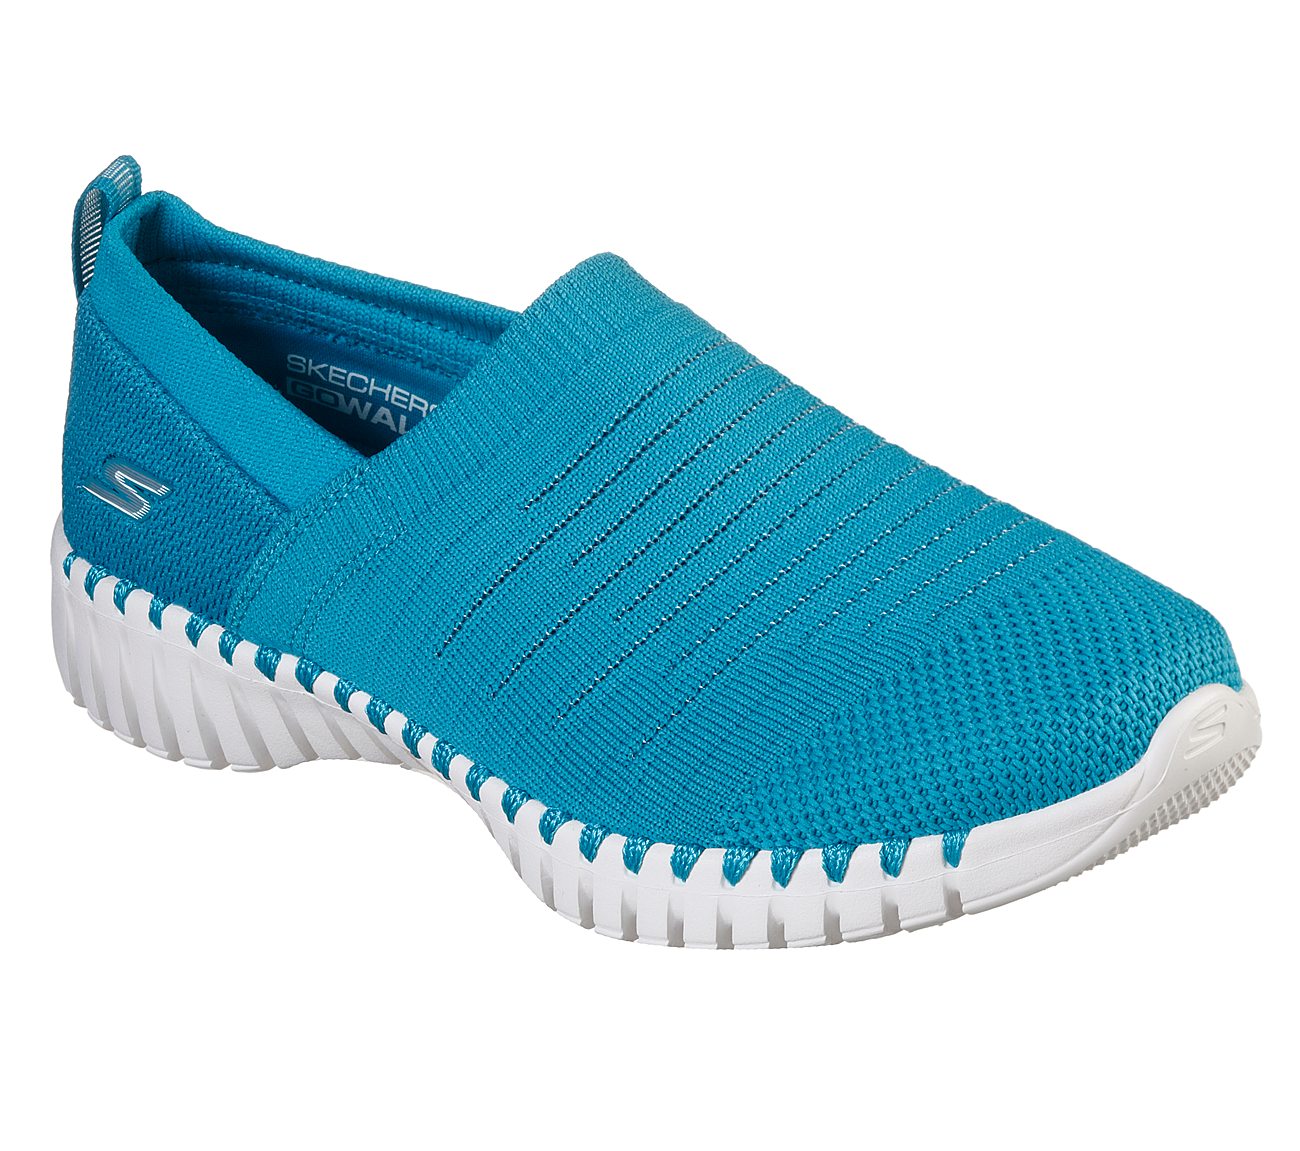 GO WALK SMART - WISE, TURQUOISE Footwear Lateral View